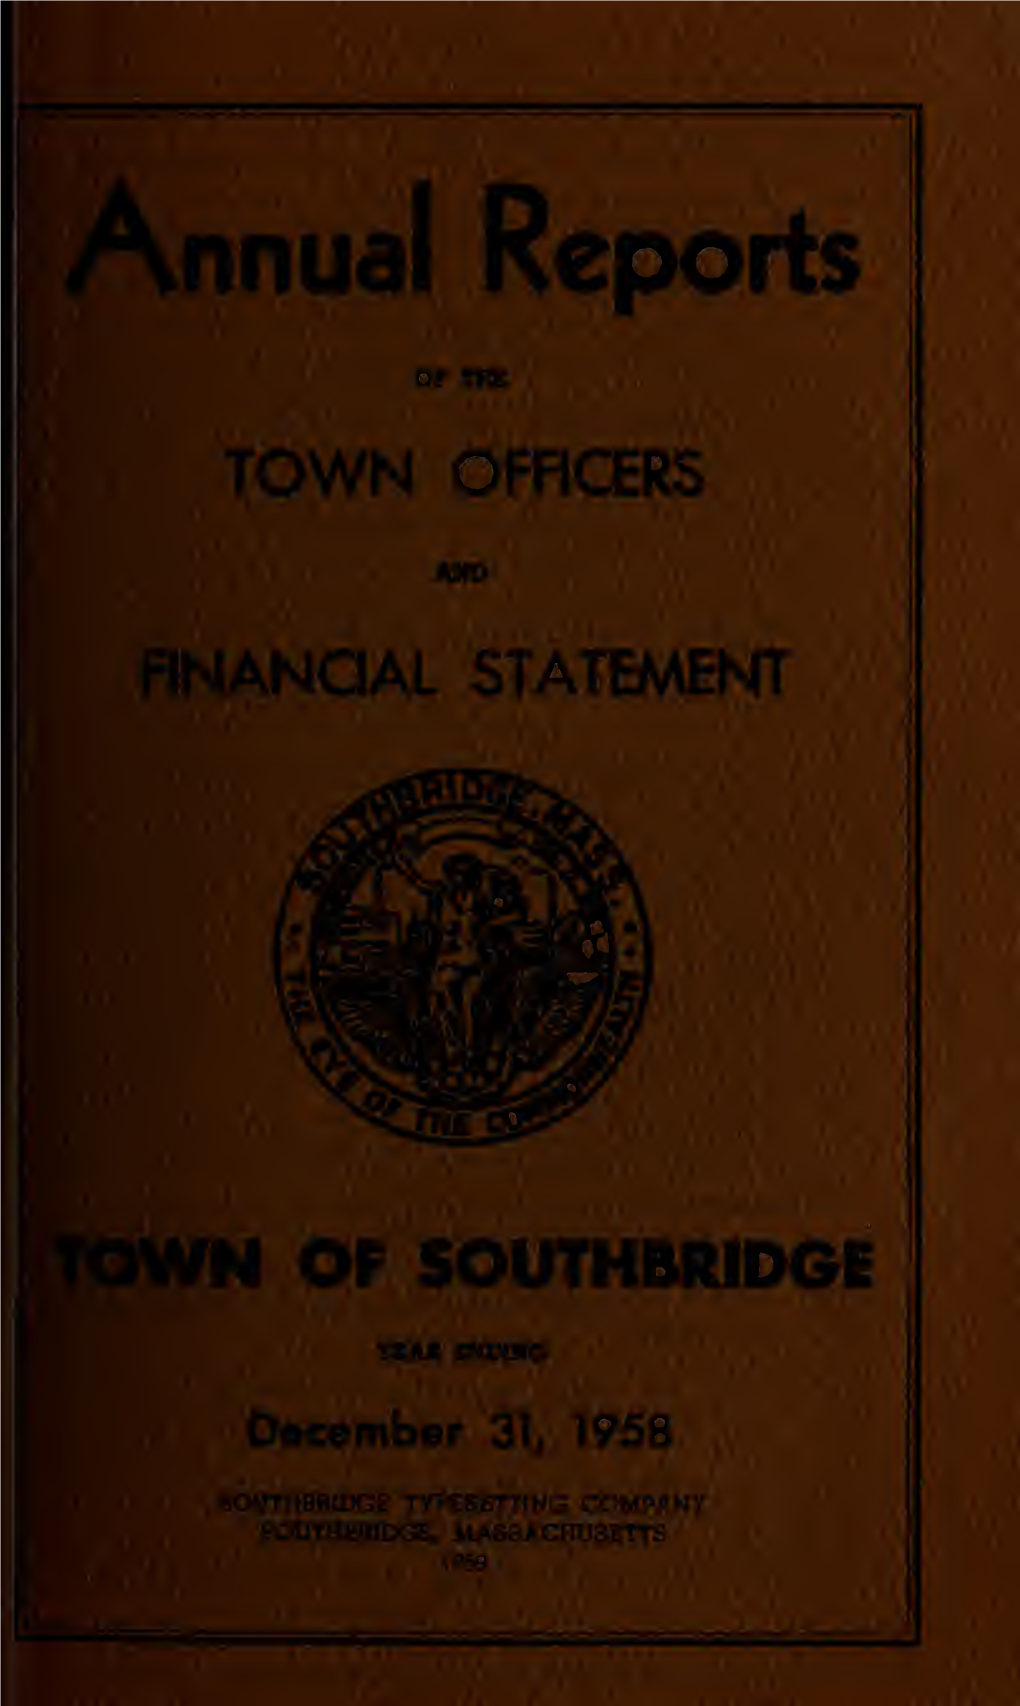 Annual Reports of the Town Officers of Southbridge for the Year Ending